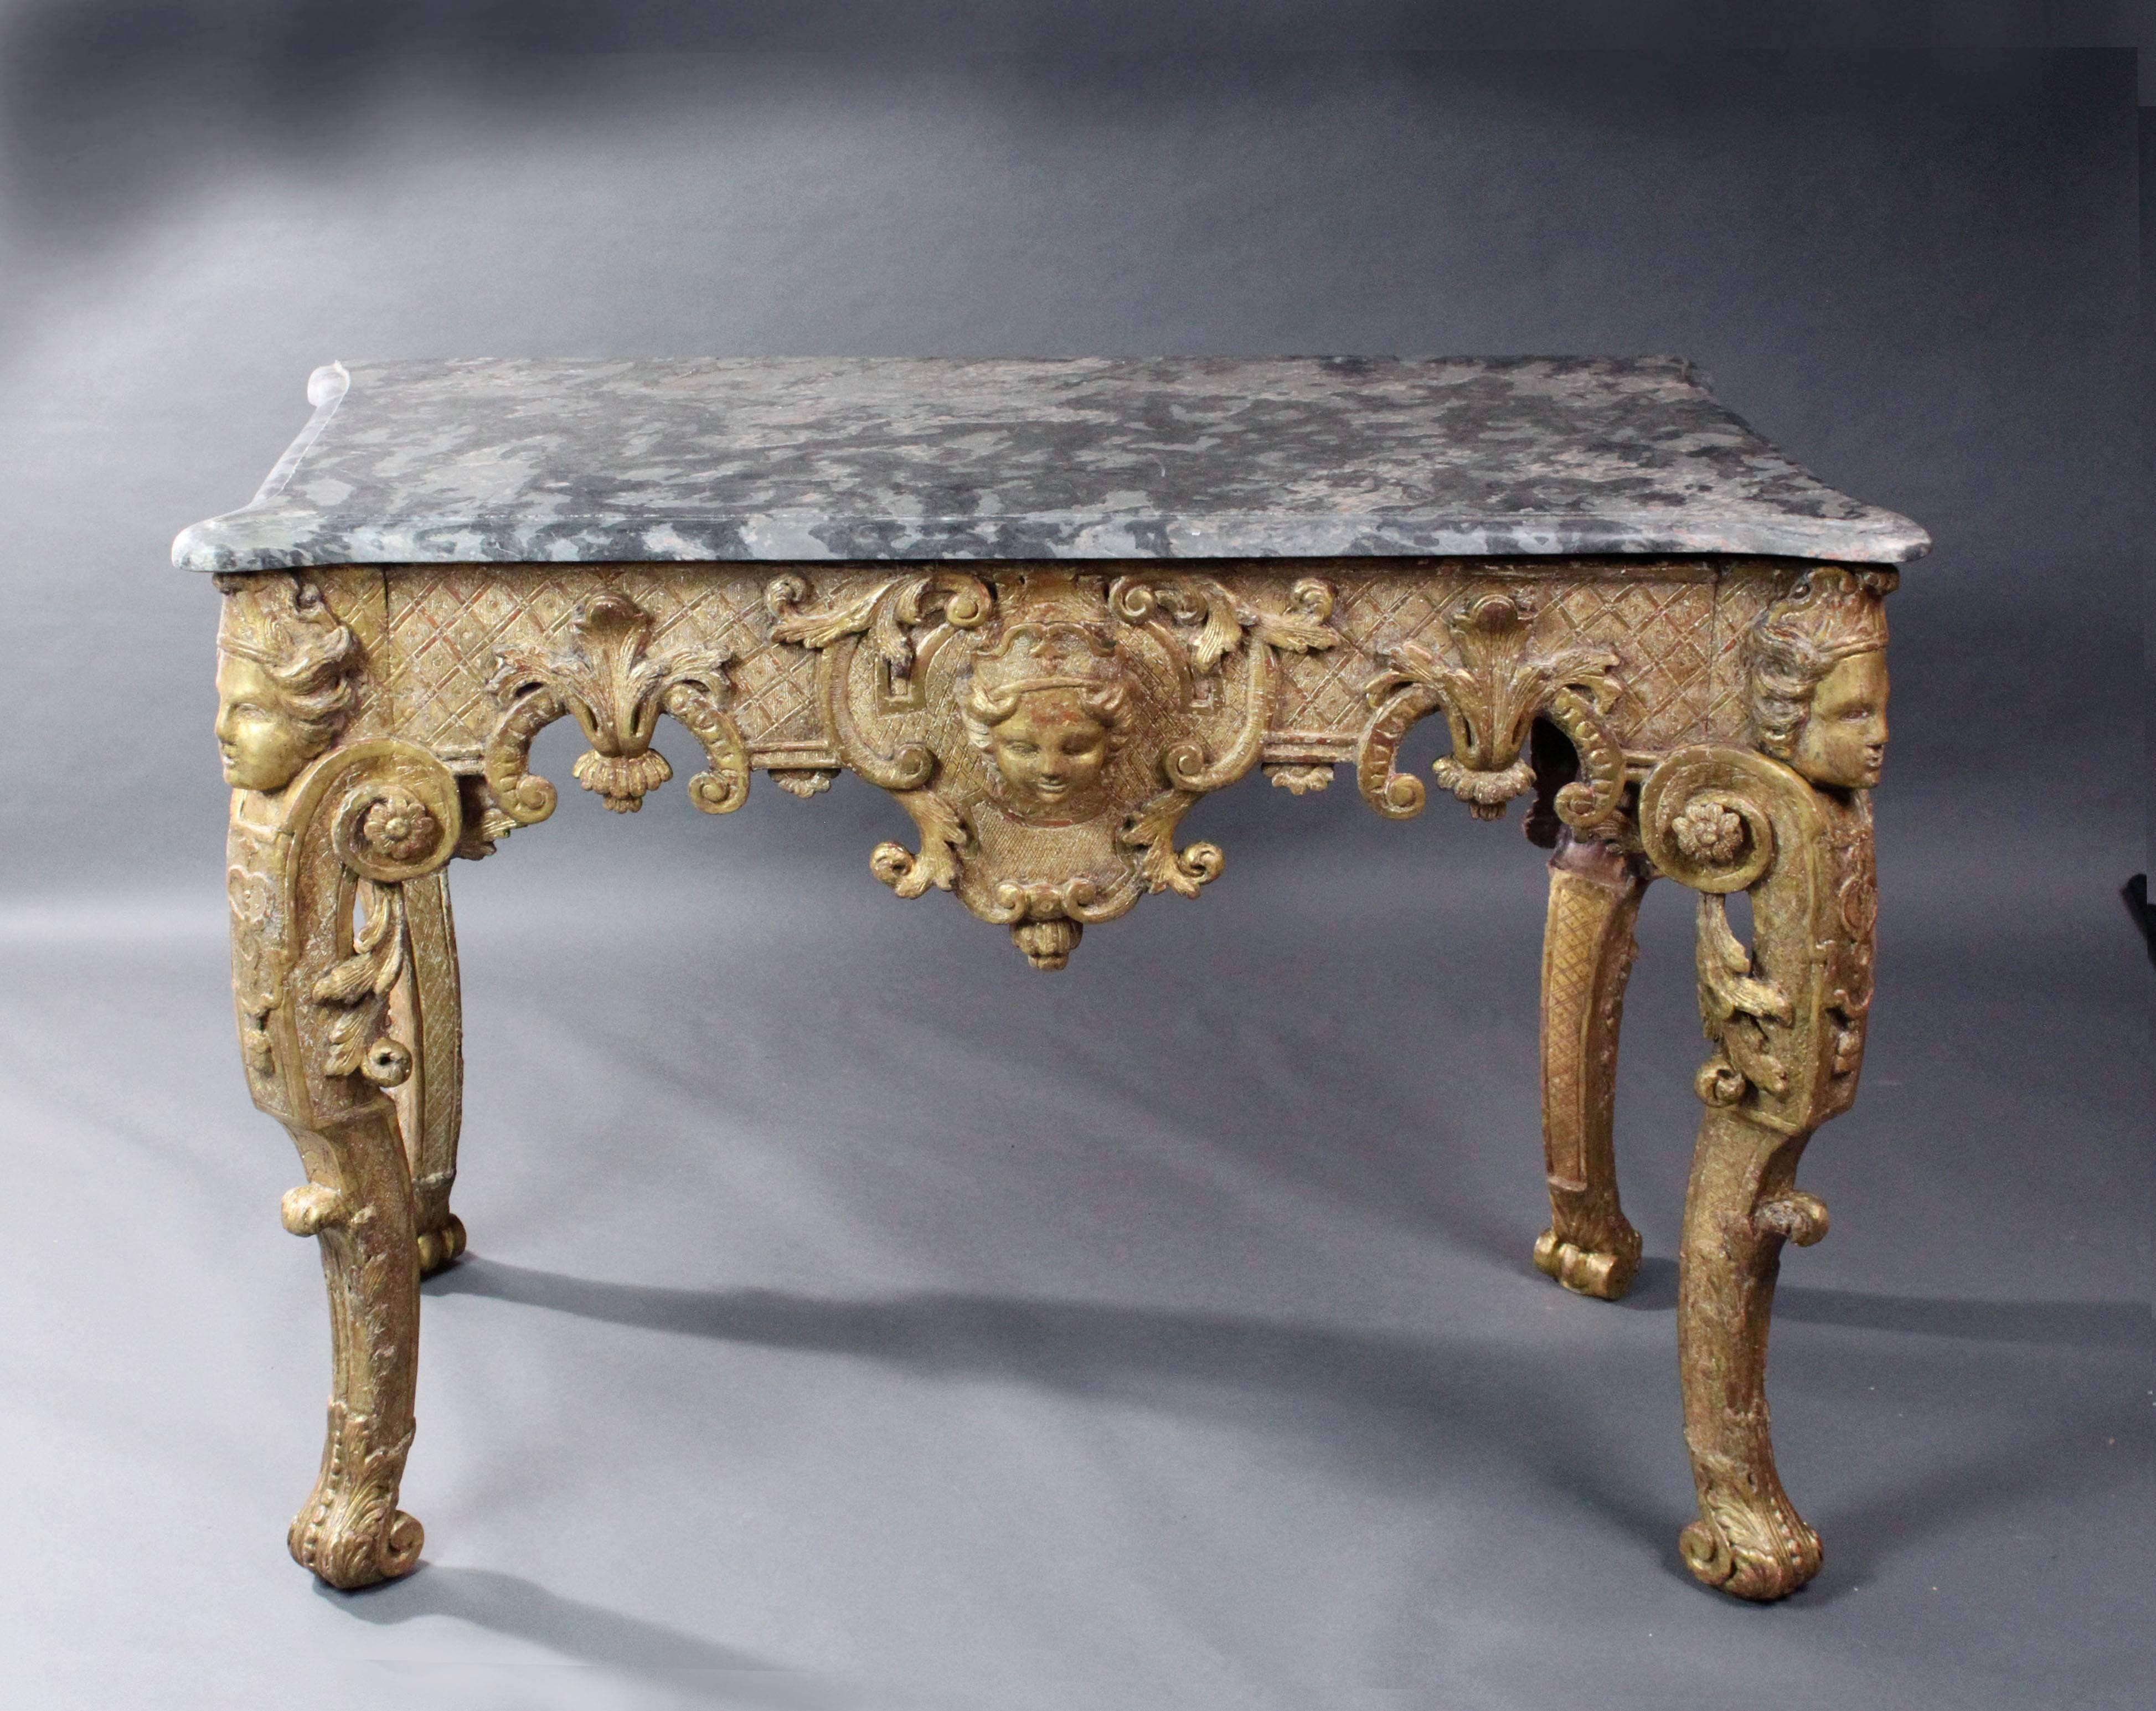 A fine late 17th-early 18th century Italian or French giltwood console table retaining much of its original gilding; supported on well carved caryatids with scroll feet; the frieze with carved acanthus leaves, Rococo scrolls and a carved mask on a